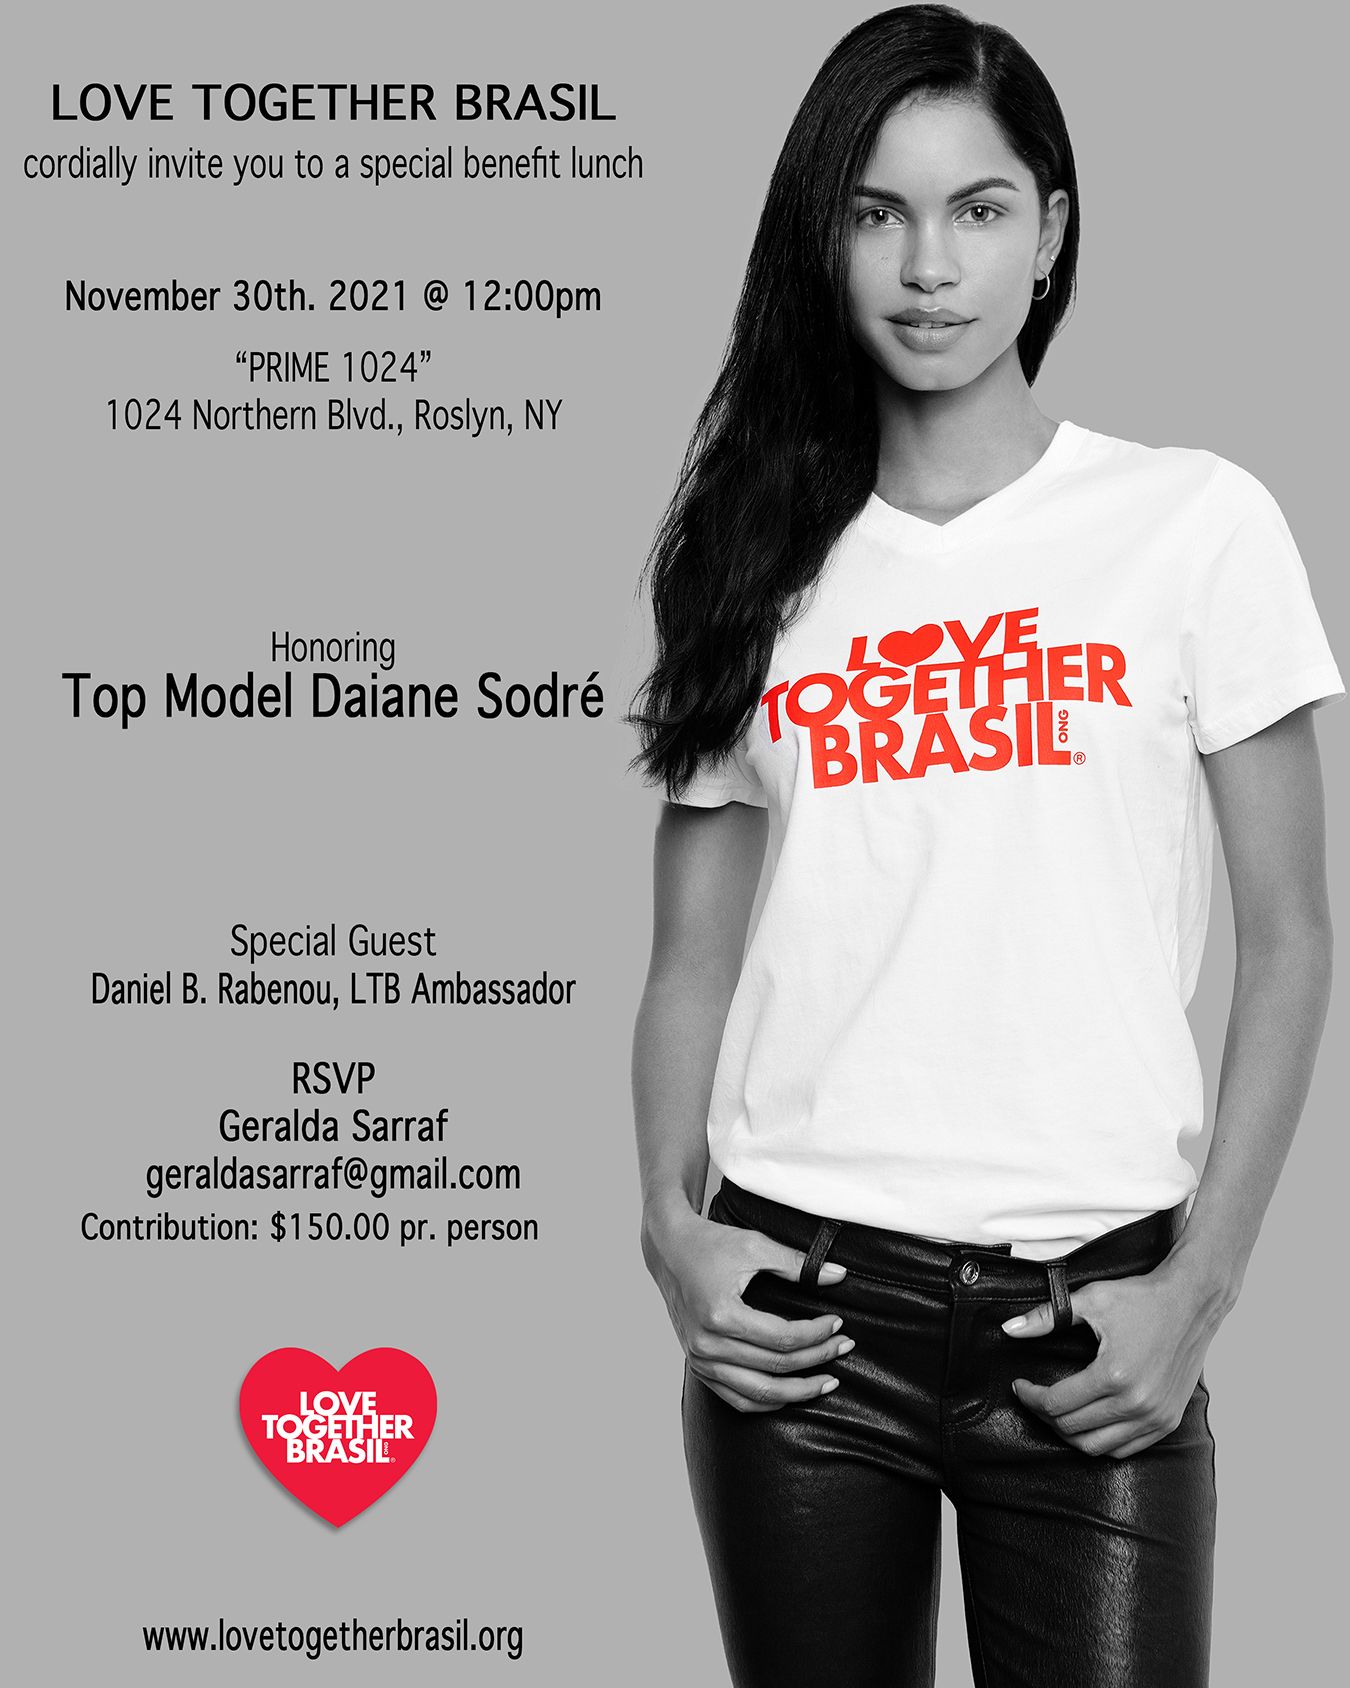 Special benefit lunch for Love Together Brasil